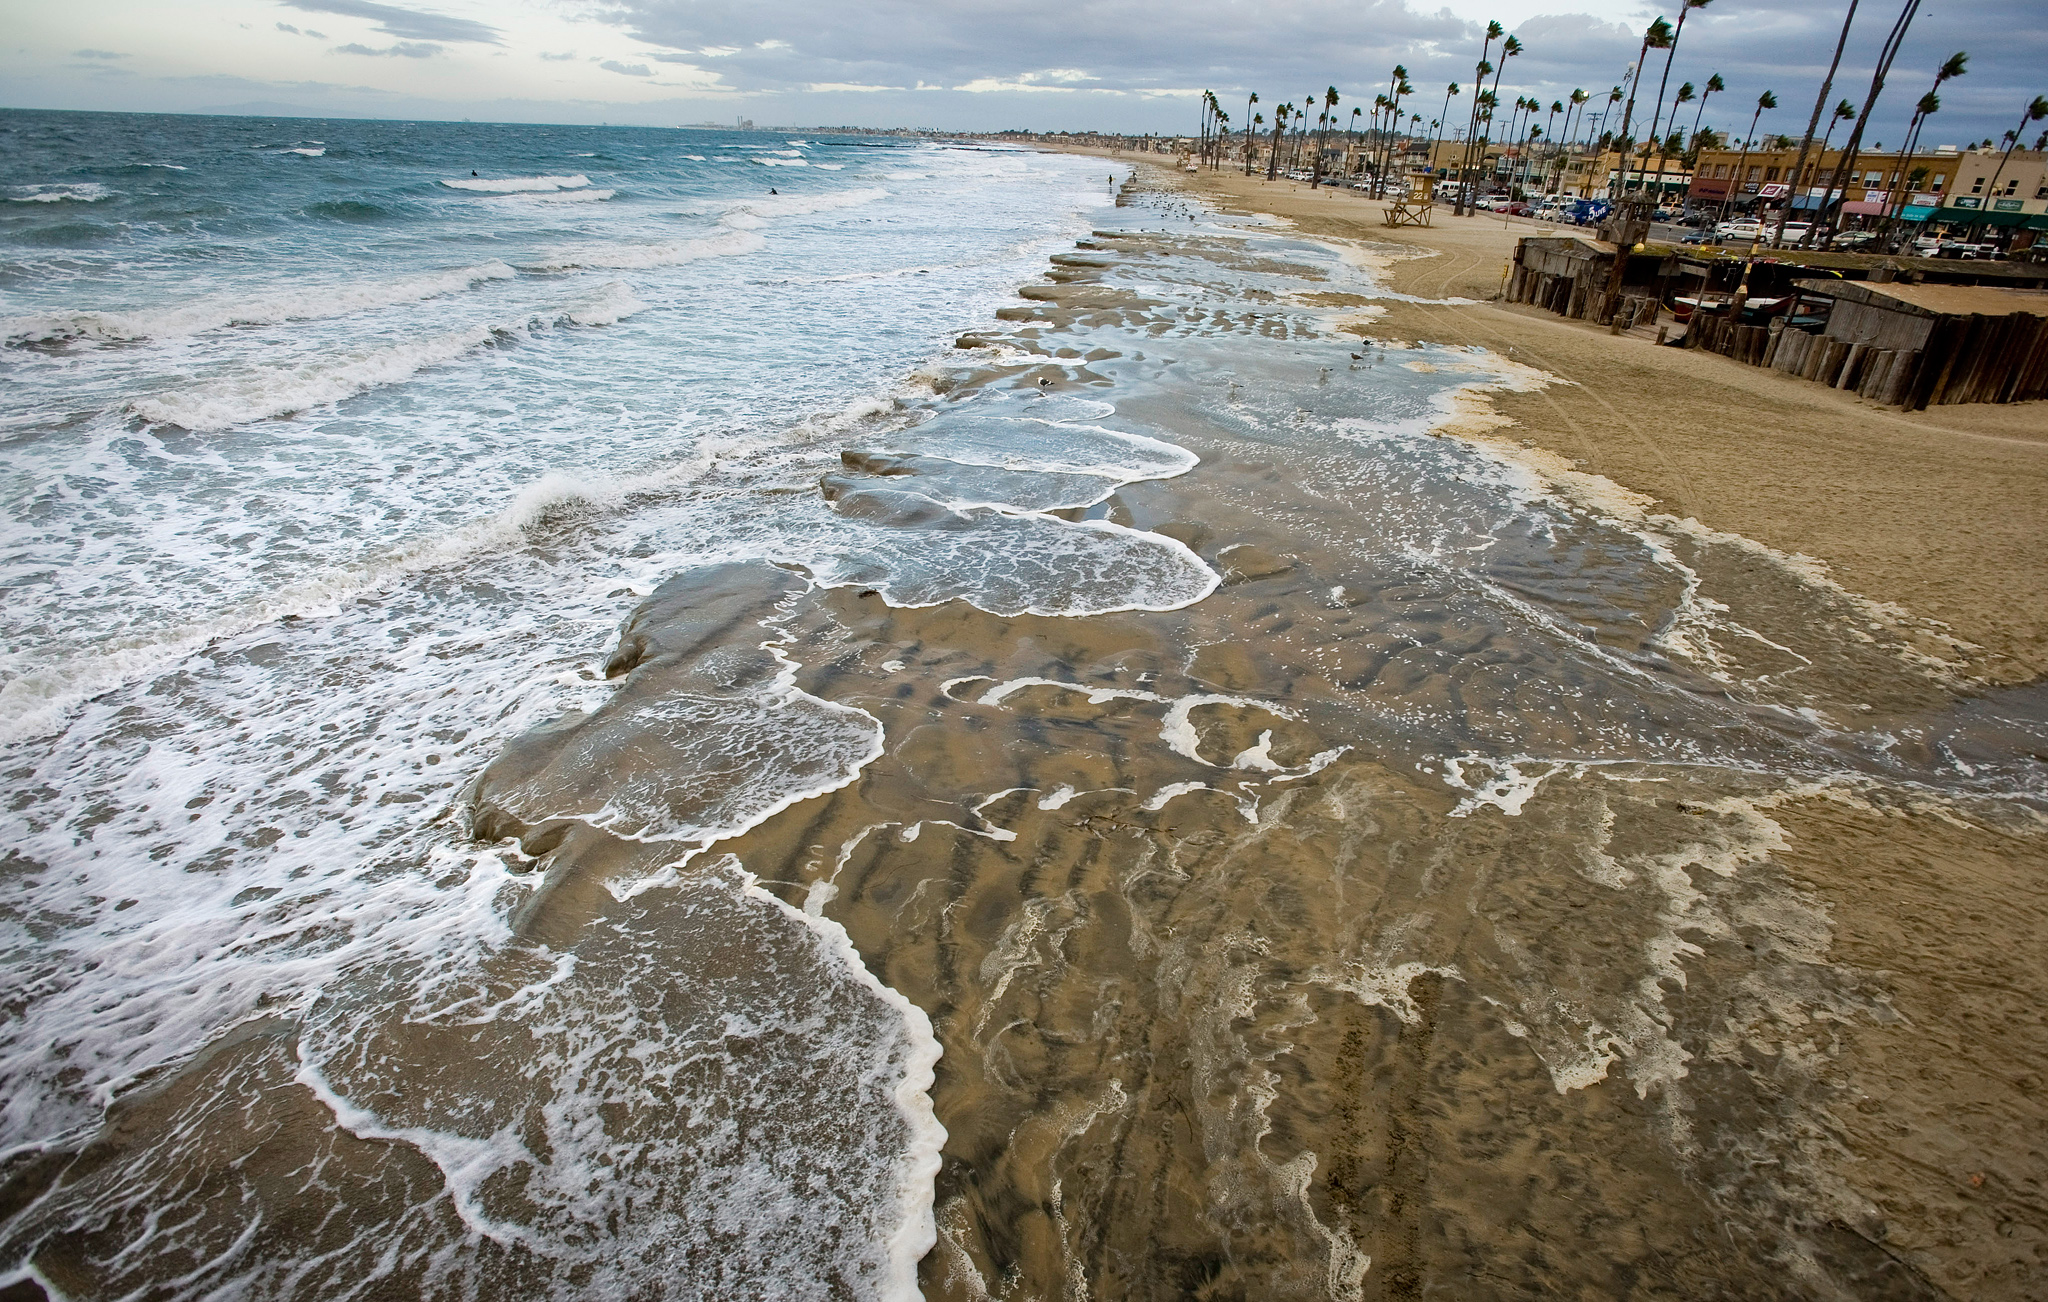 King Tides: What Explains High Water Threatening Global Coasts?